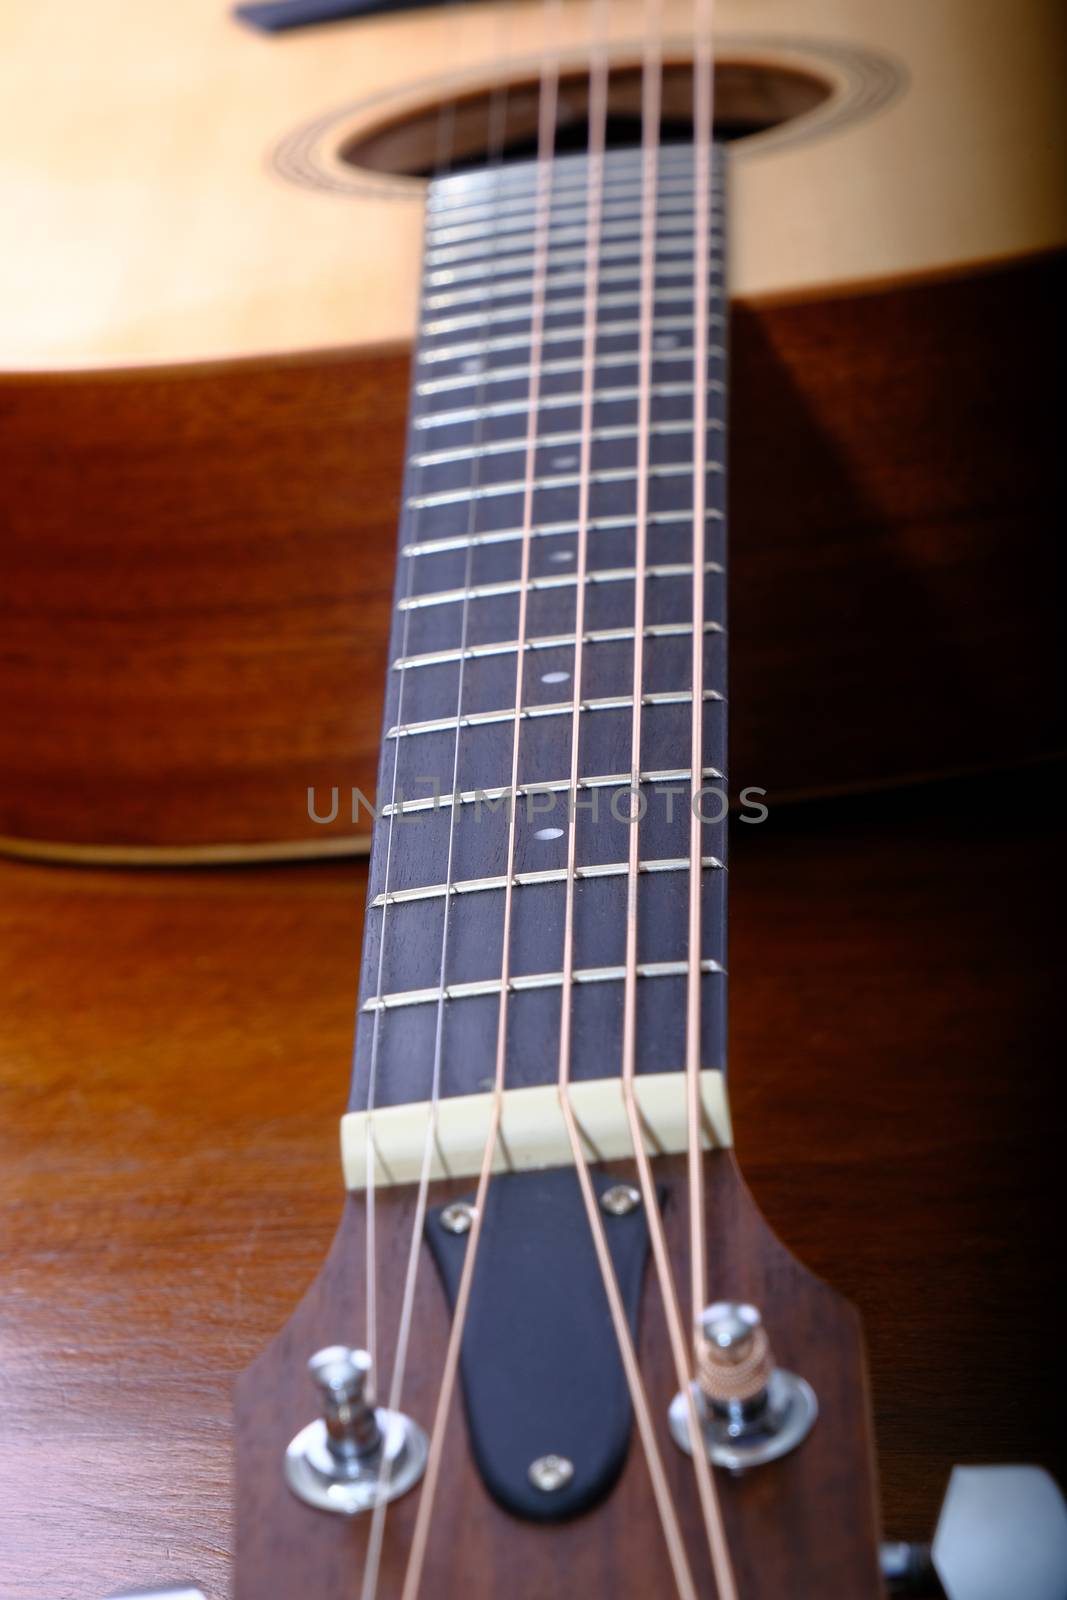 Details on a nice sitka spruce acoustic guitar